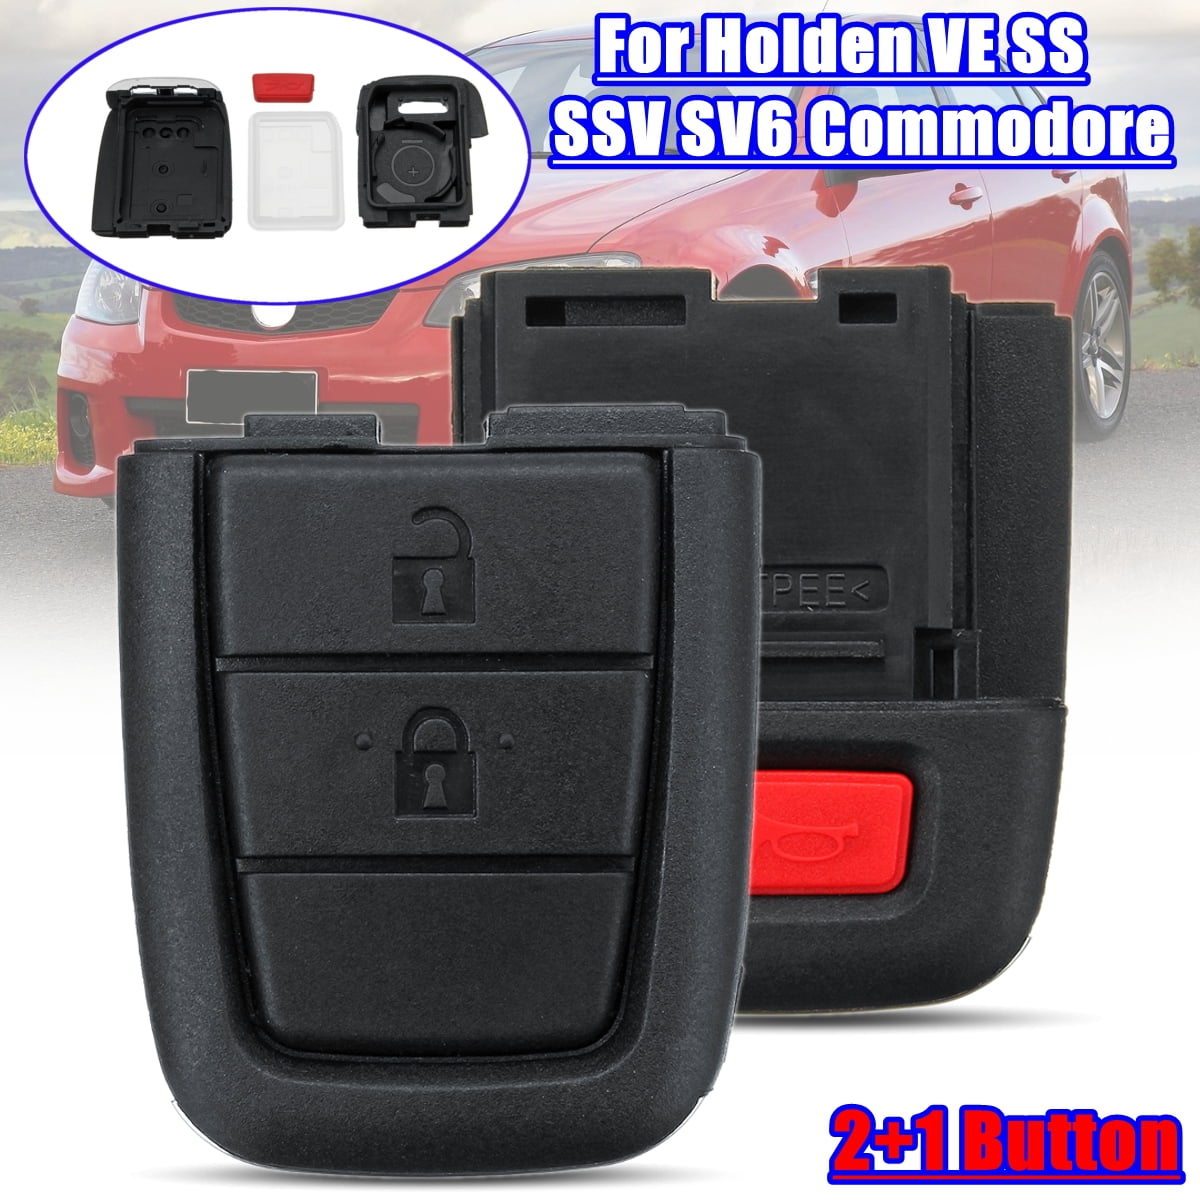 To Suit Holden VE SS SSV SV6 UTE Commodore Replacement Key 2 Button Shell/Case